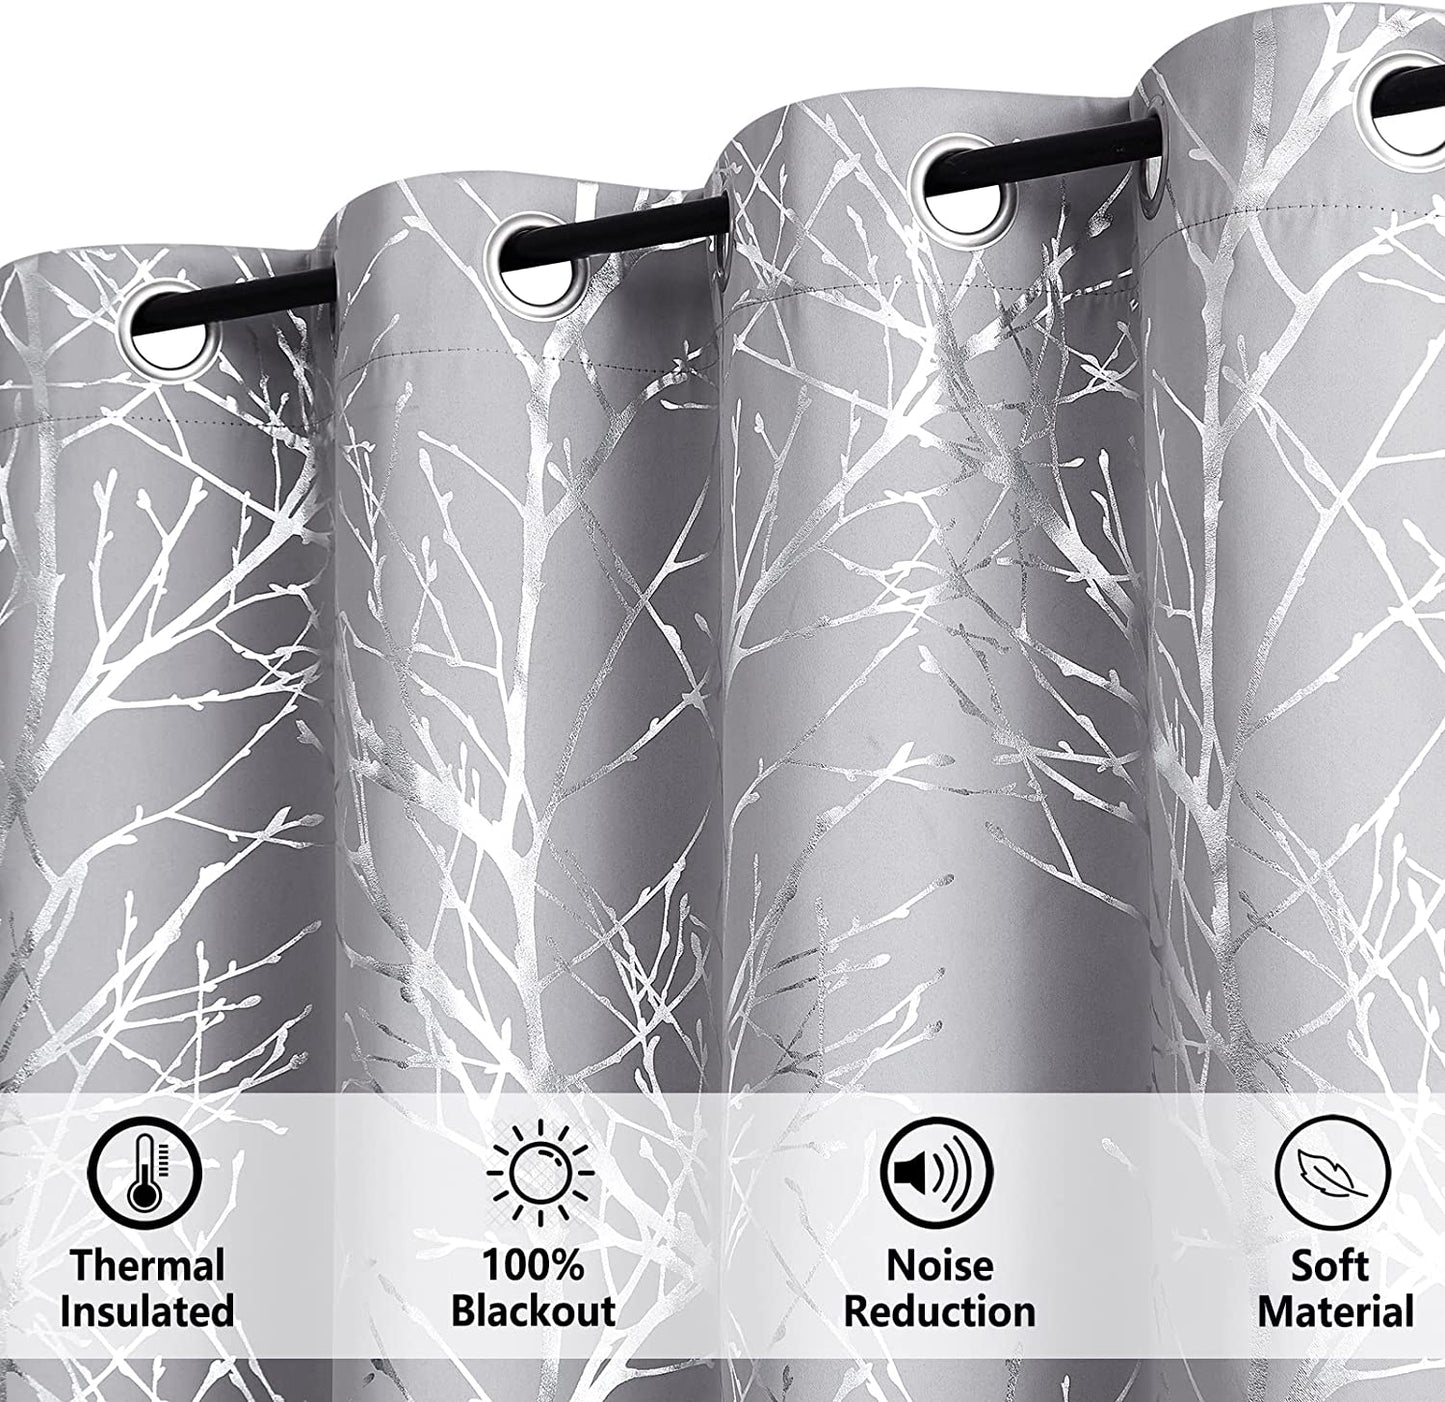 FMFUNCTEX Metallic Tree Blackout Curtains Bedroom Grey 84-Inch Living-Room Branch Print Curtain Panels Forest Triple Weave Thermal Insulated Drapes for Windows Dorm Hotel Grommet Top, 2Panels  Fmfunctex   